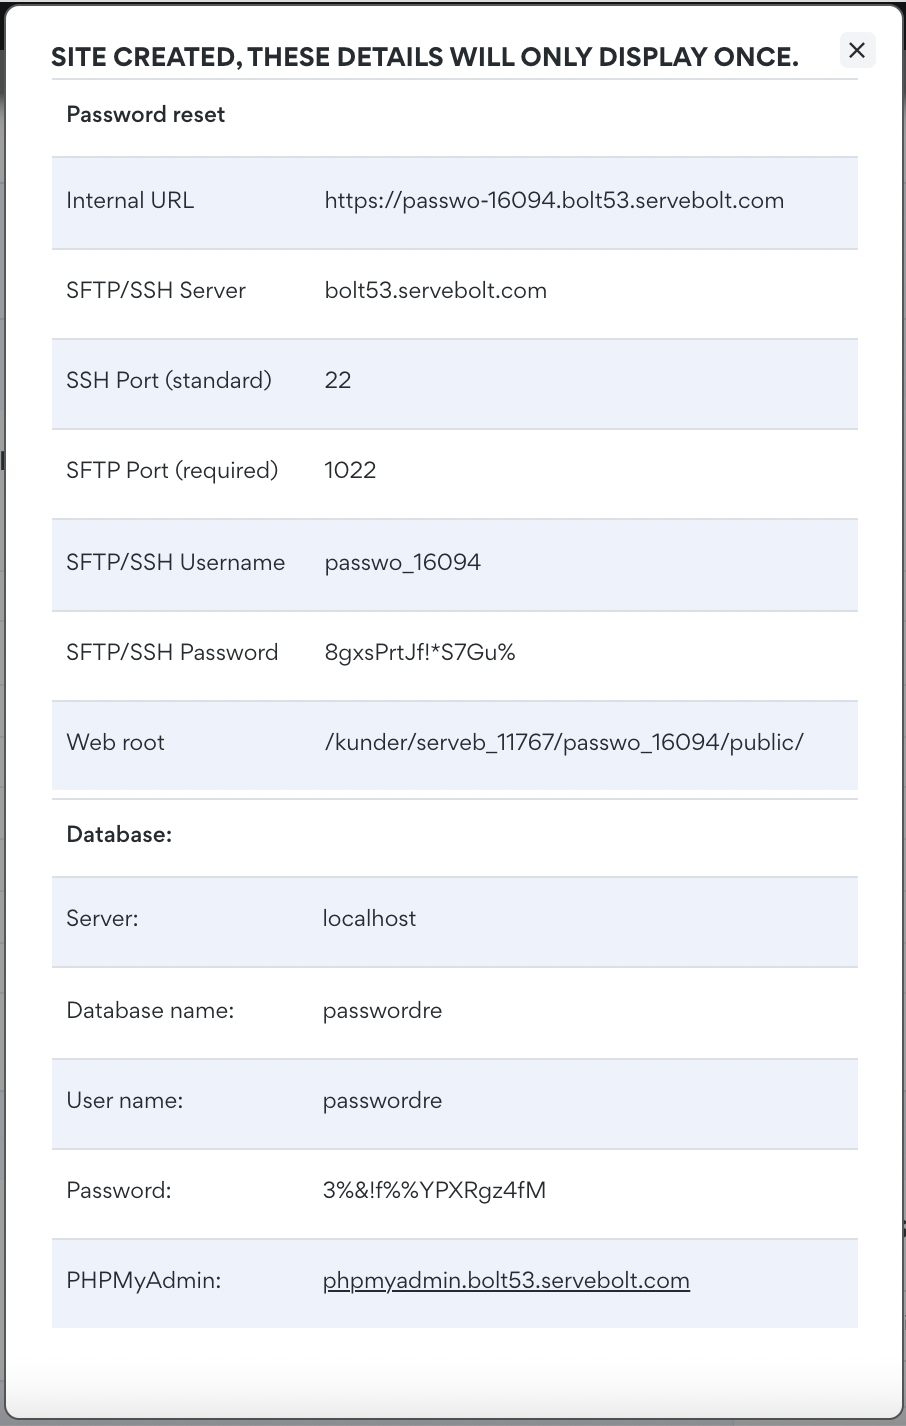 Image shared from the Servebolt Admin Panel, sharing SFTP/SSH and database credentials